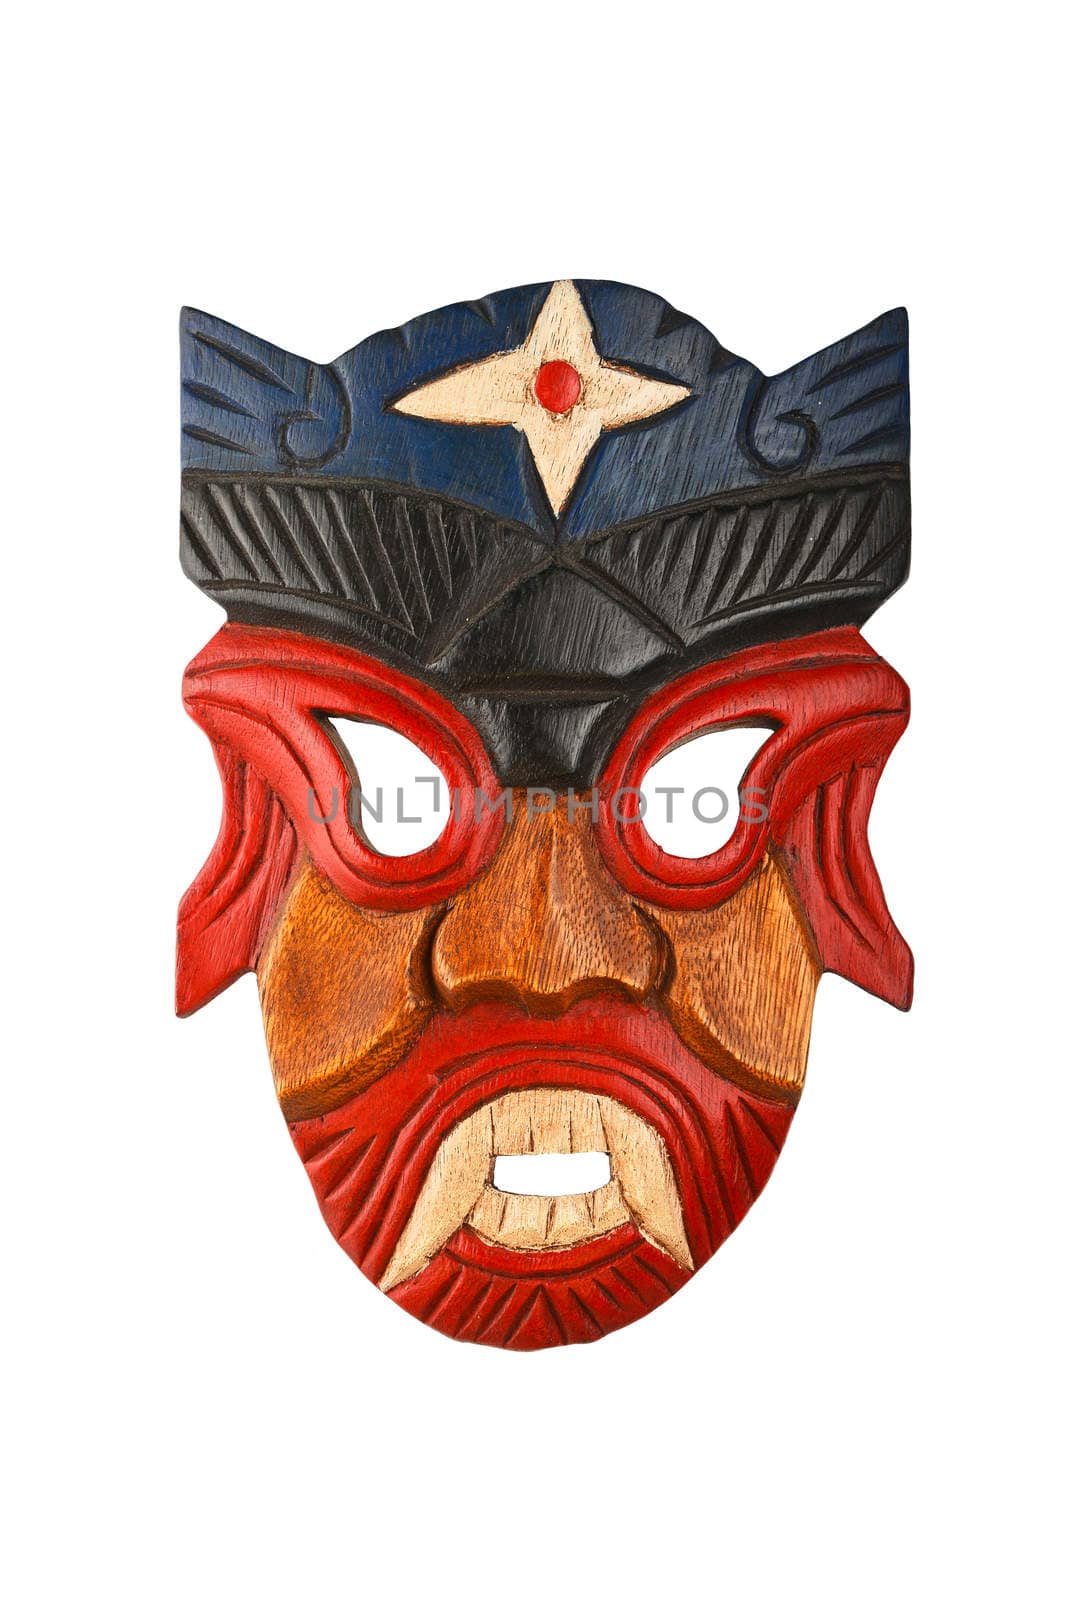 Asian traditional wooden painted mask isolated on white by BreakingTheWalls